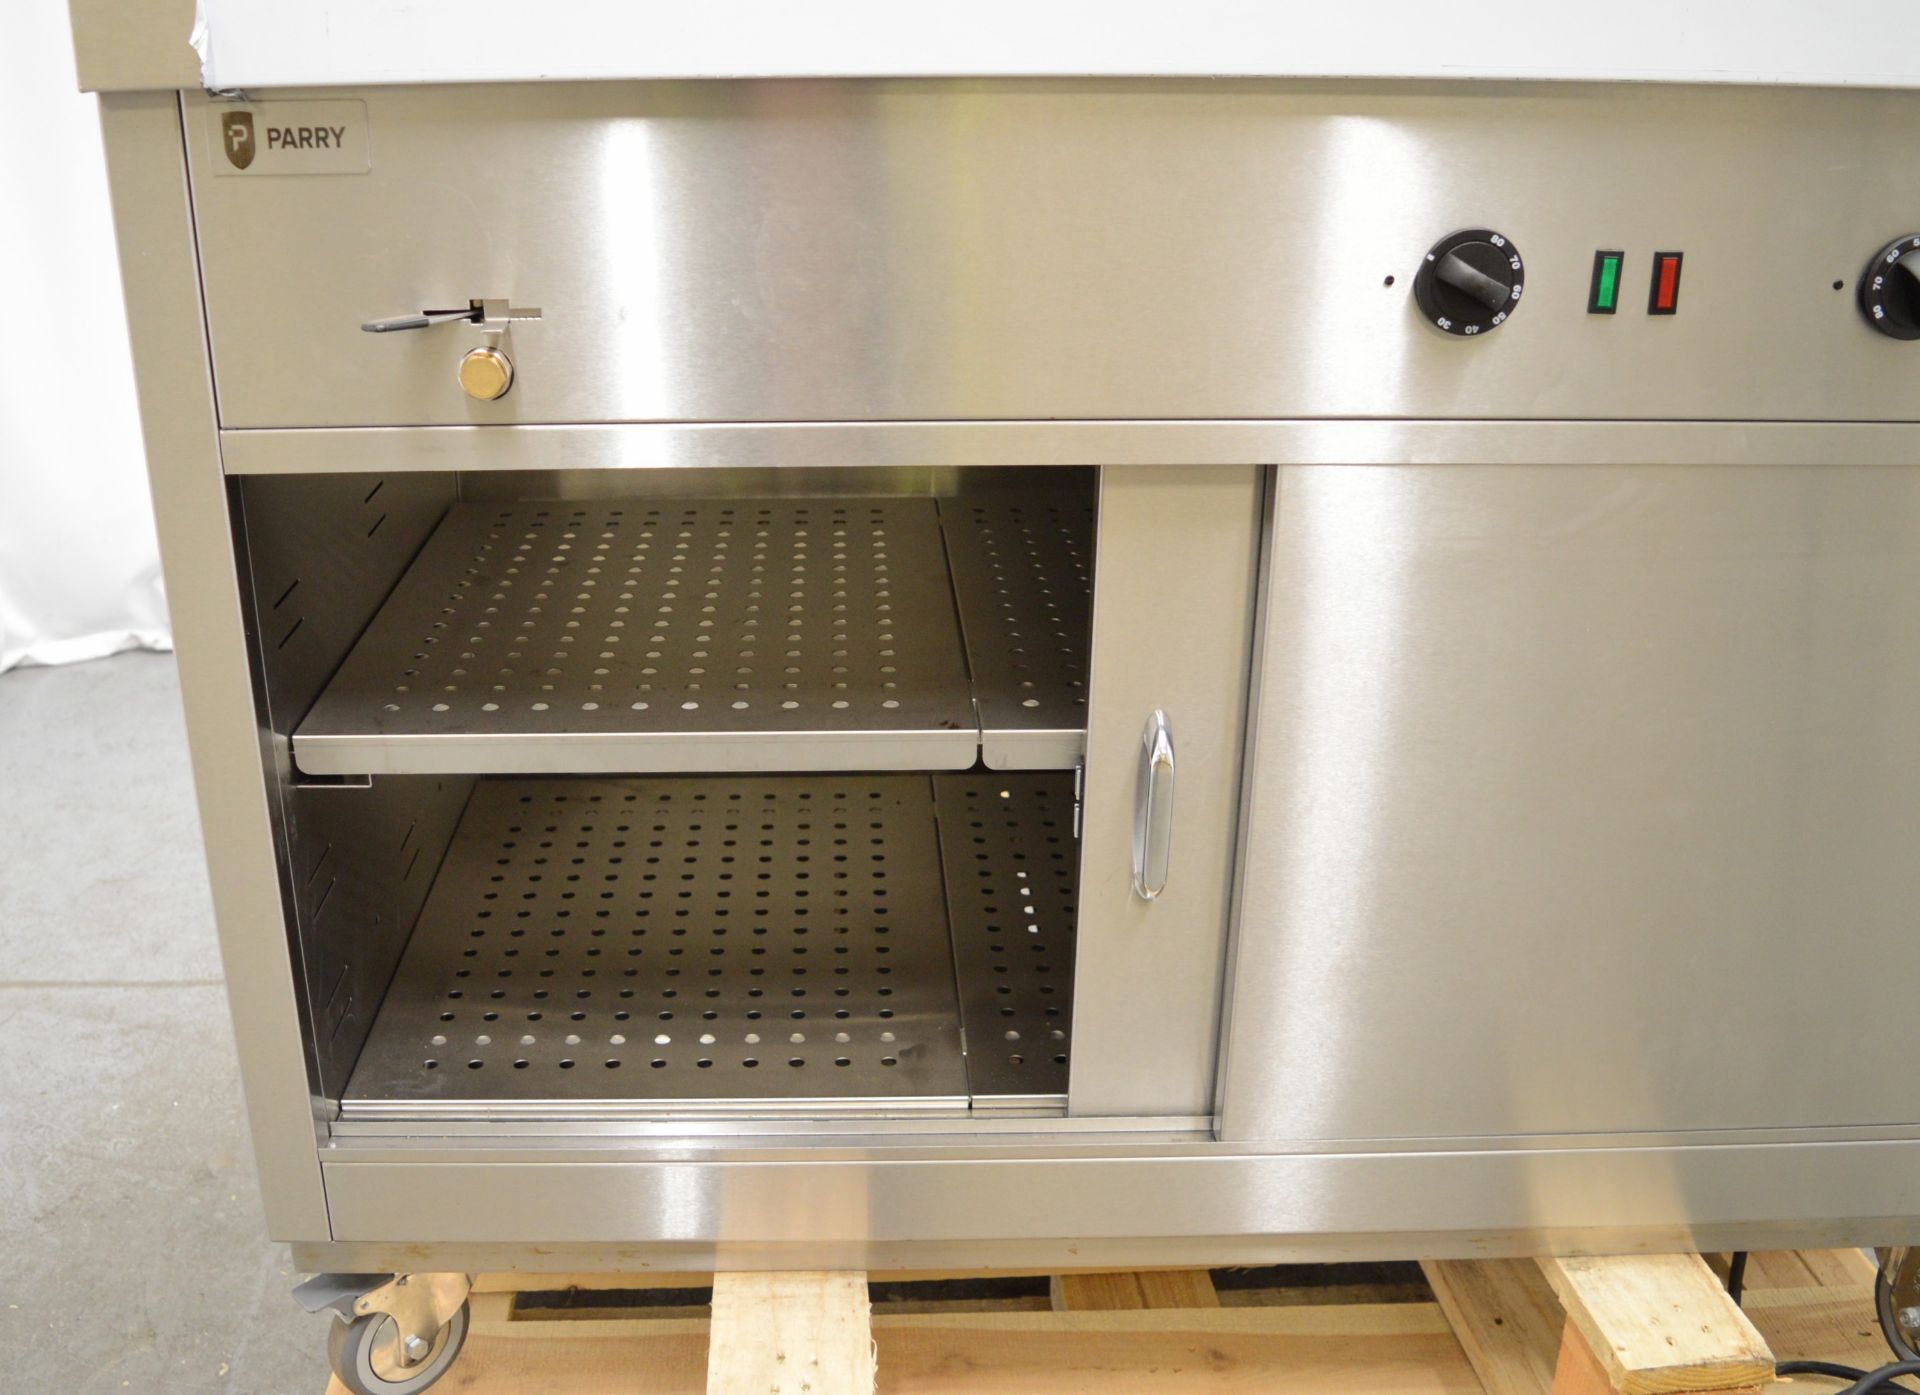 Parry HOT12BM stainless steel bain marie hot cupboard, 1200x650x900mm (LxDxH) 230v - Image 2 of 8